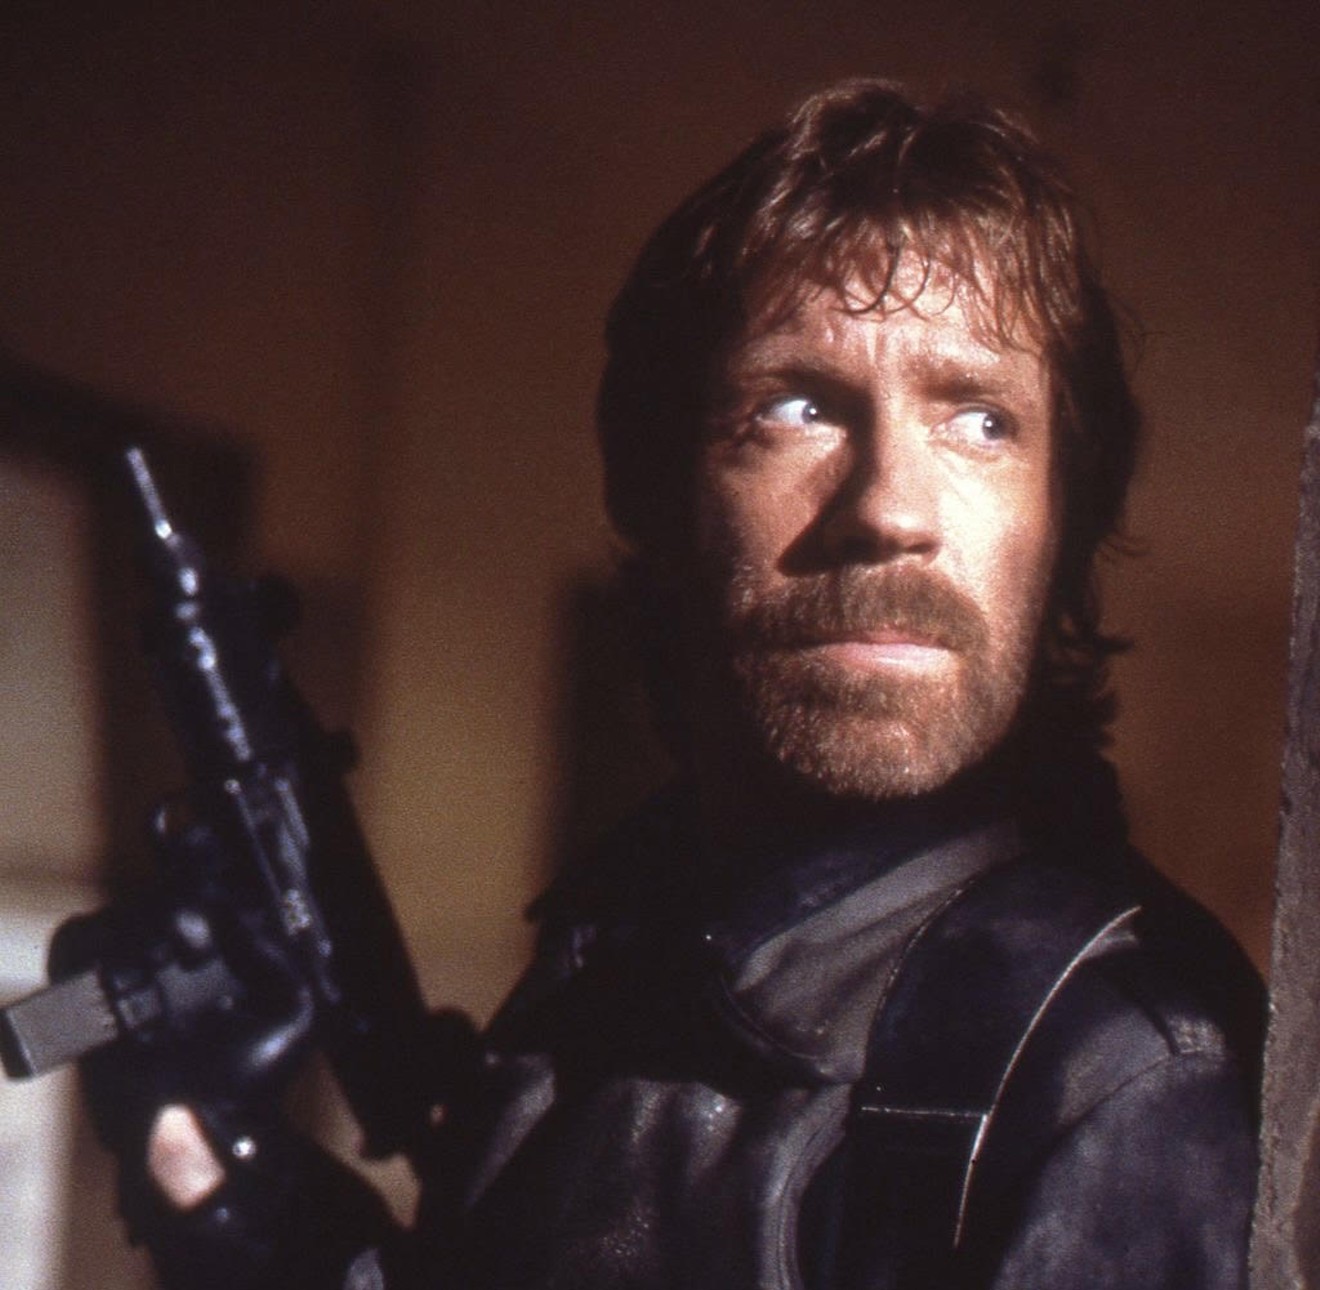 Some might consider Chuck Norris an unlikely candidate to help stop school shootings.